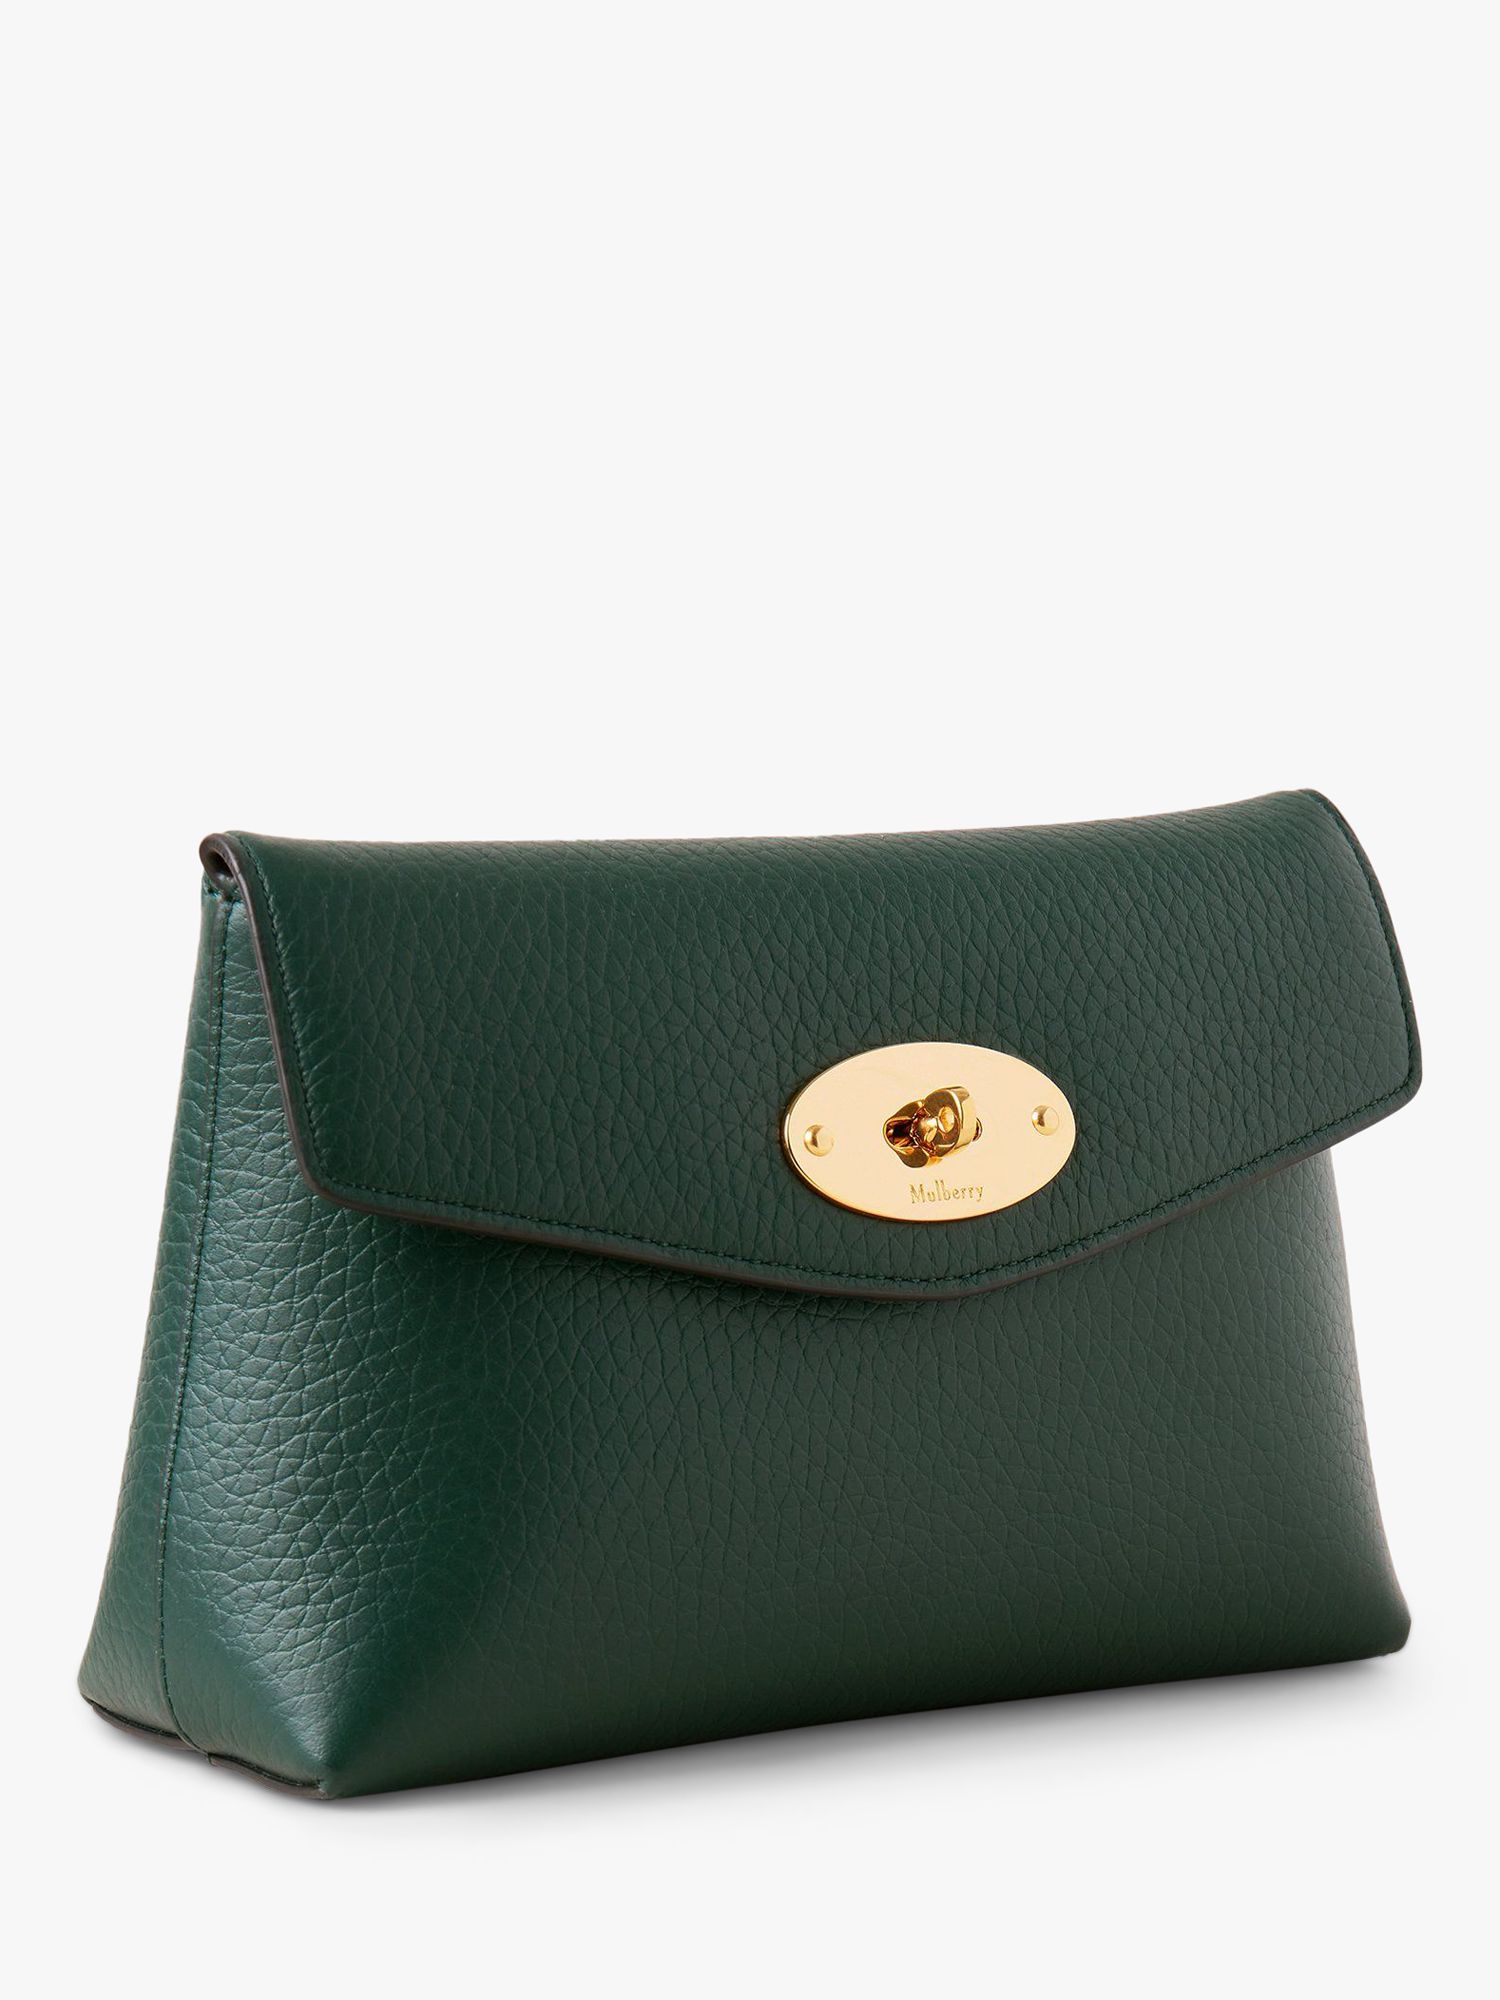 Mulberry Small Darley Heavy Grain Leather Cross Body Bag, Mulberry Green at  John Lewis & Partners